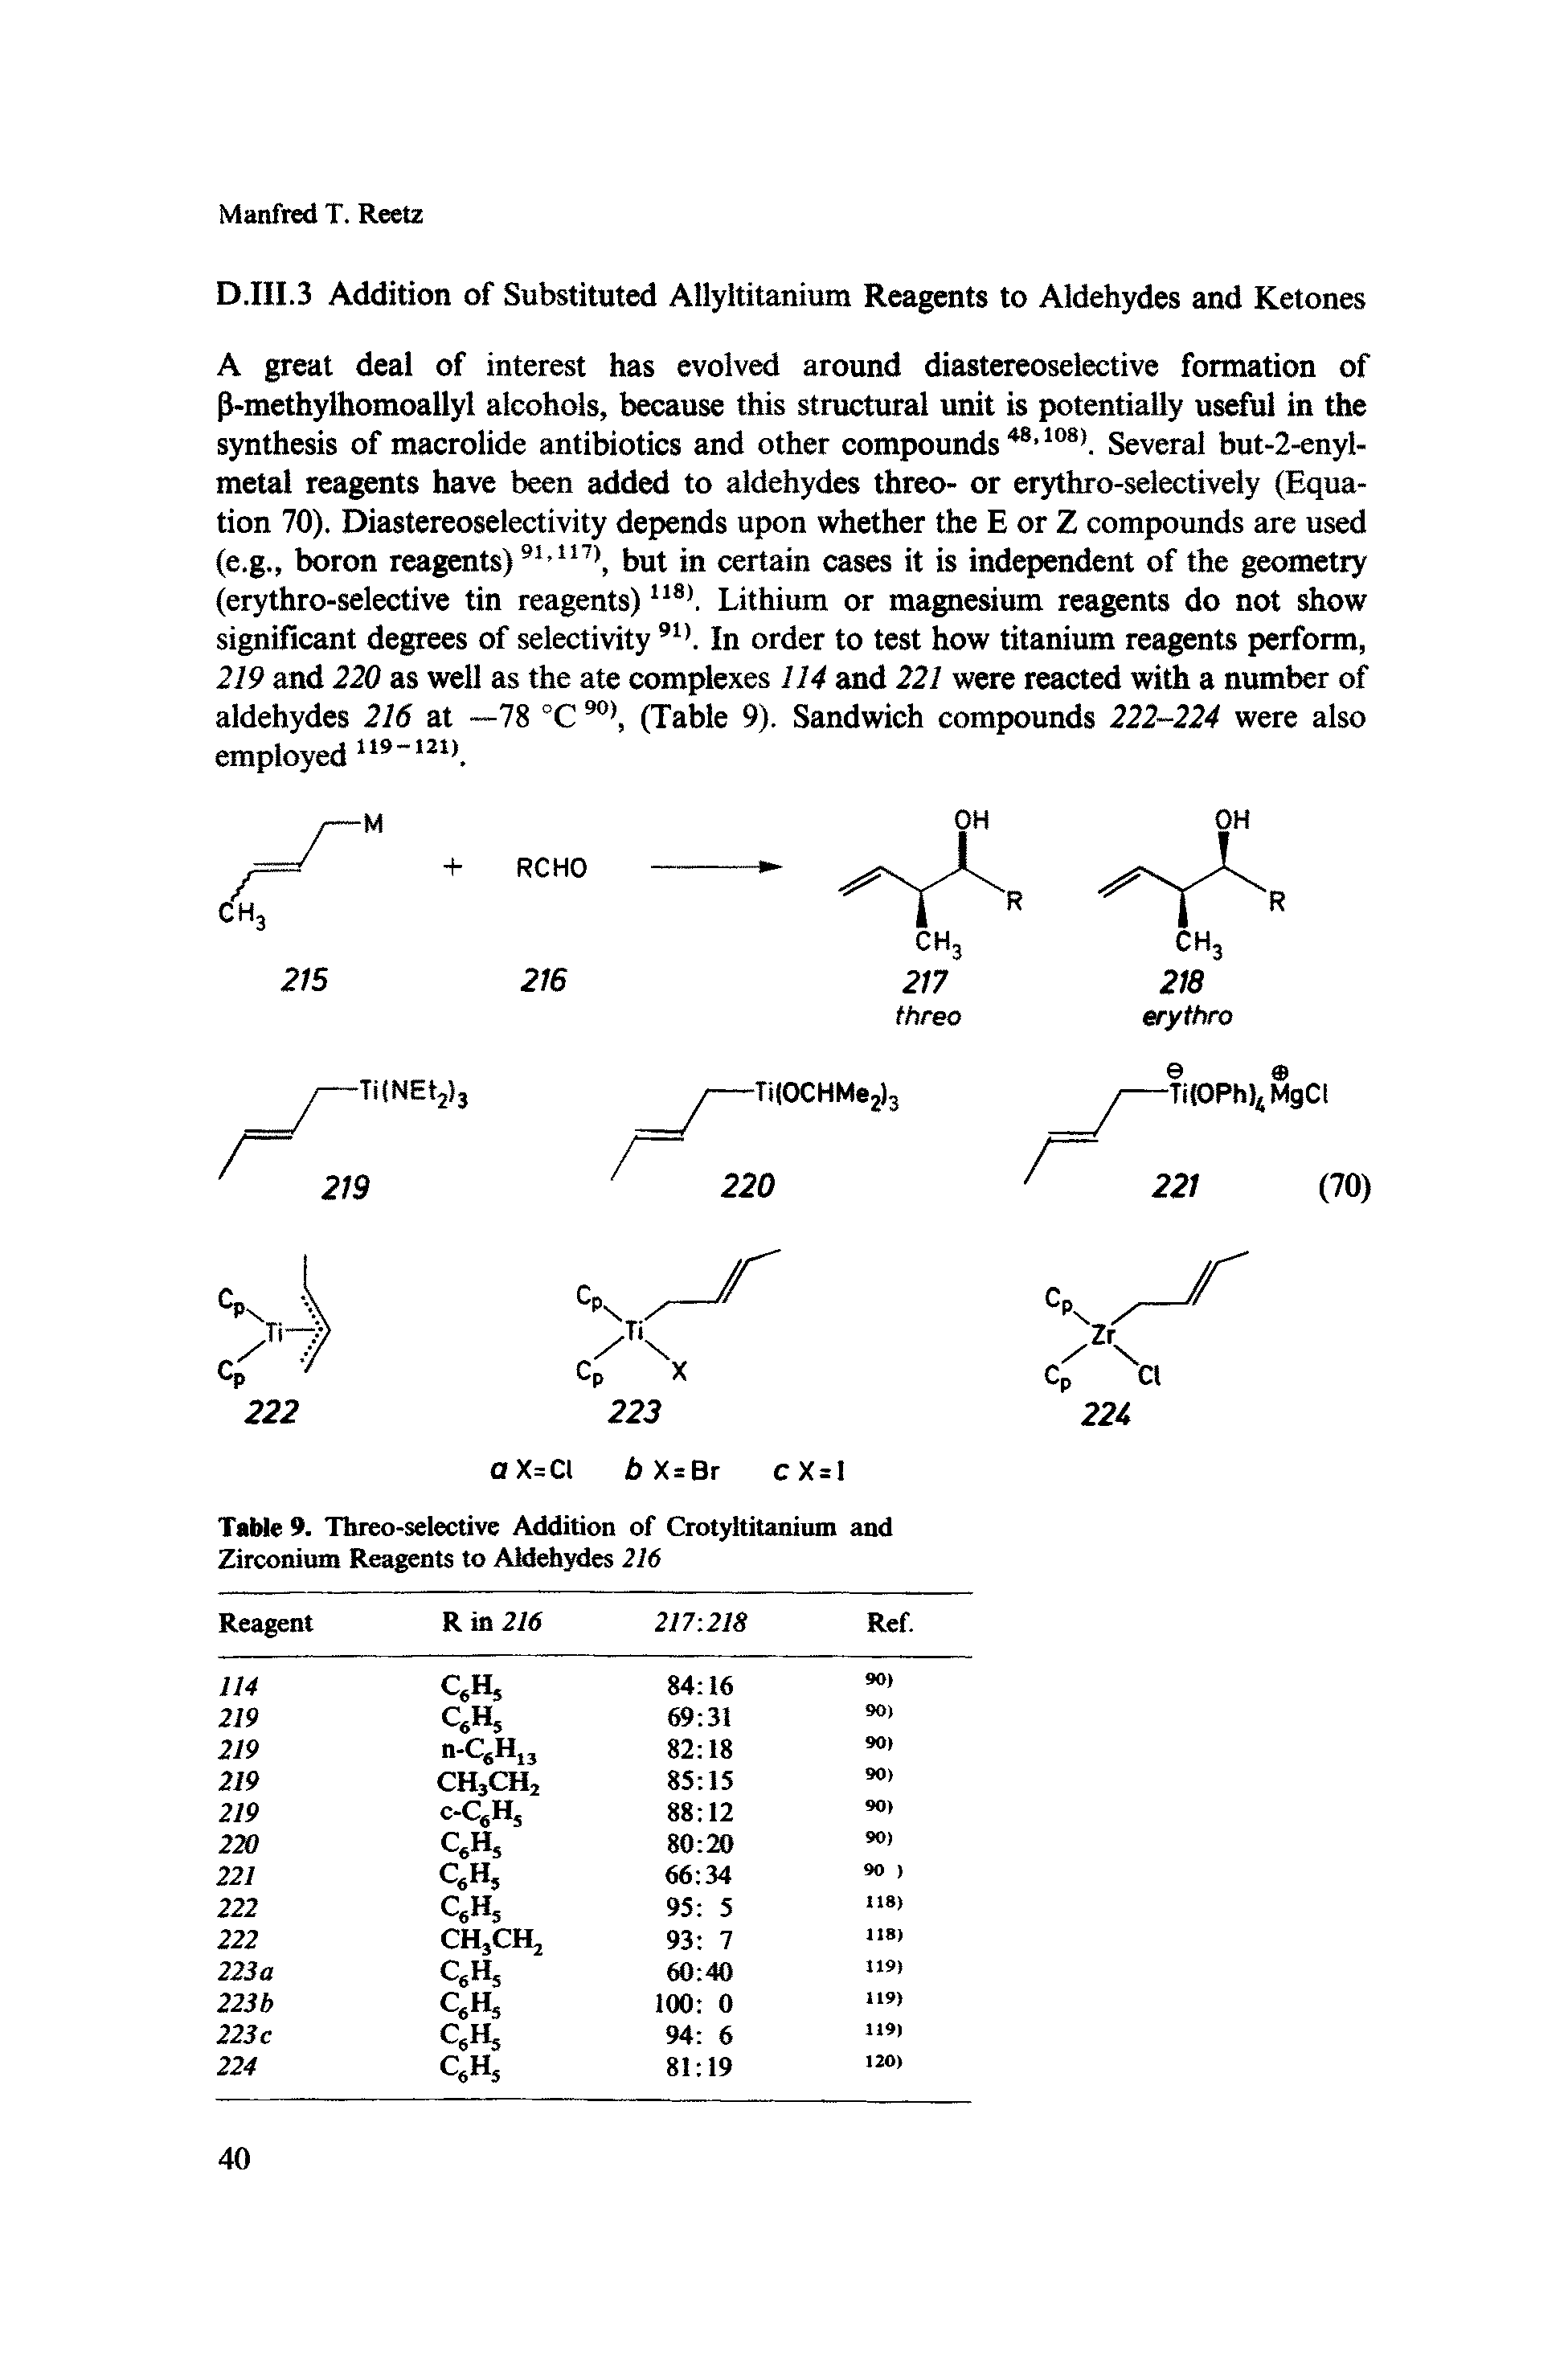 Table 9. Threo-selective Addition of Crotyltitanium and Zirconium Reagents to Aldehydes 216...